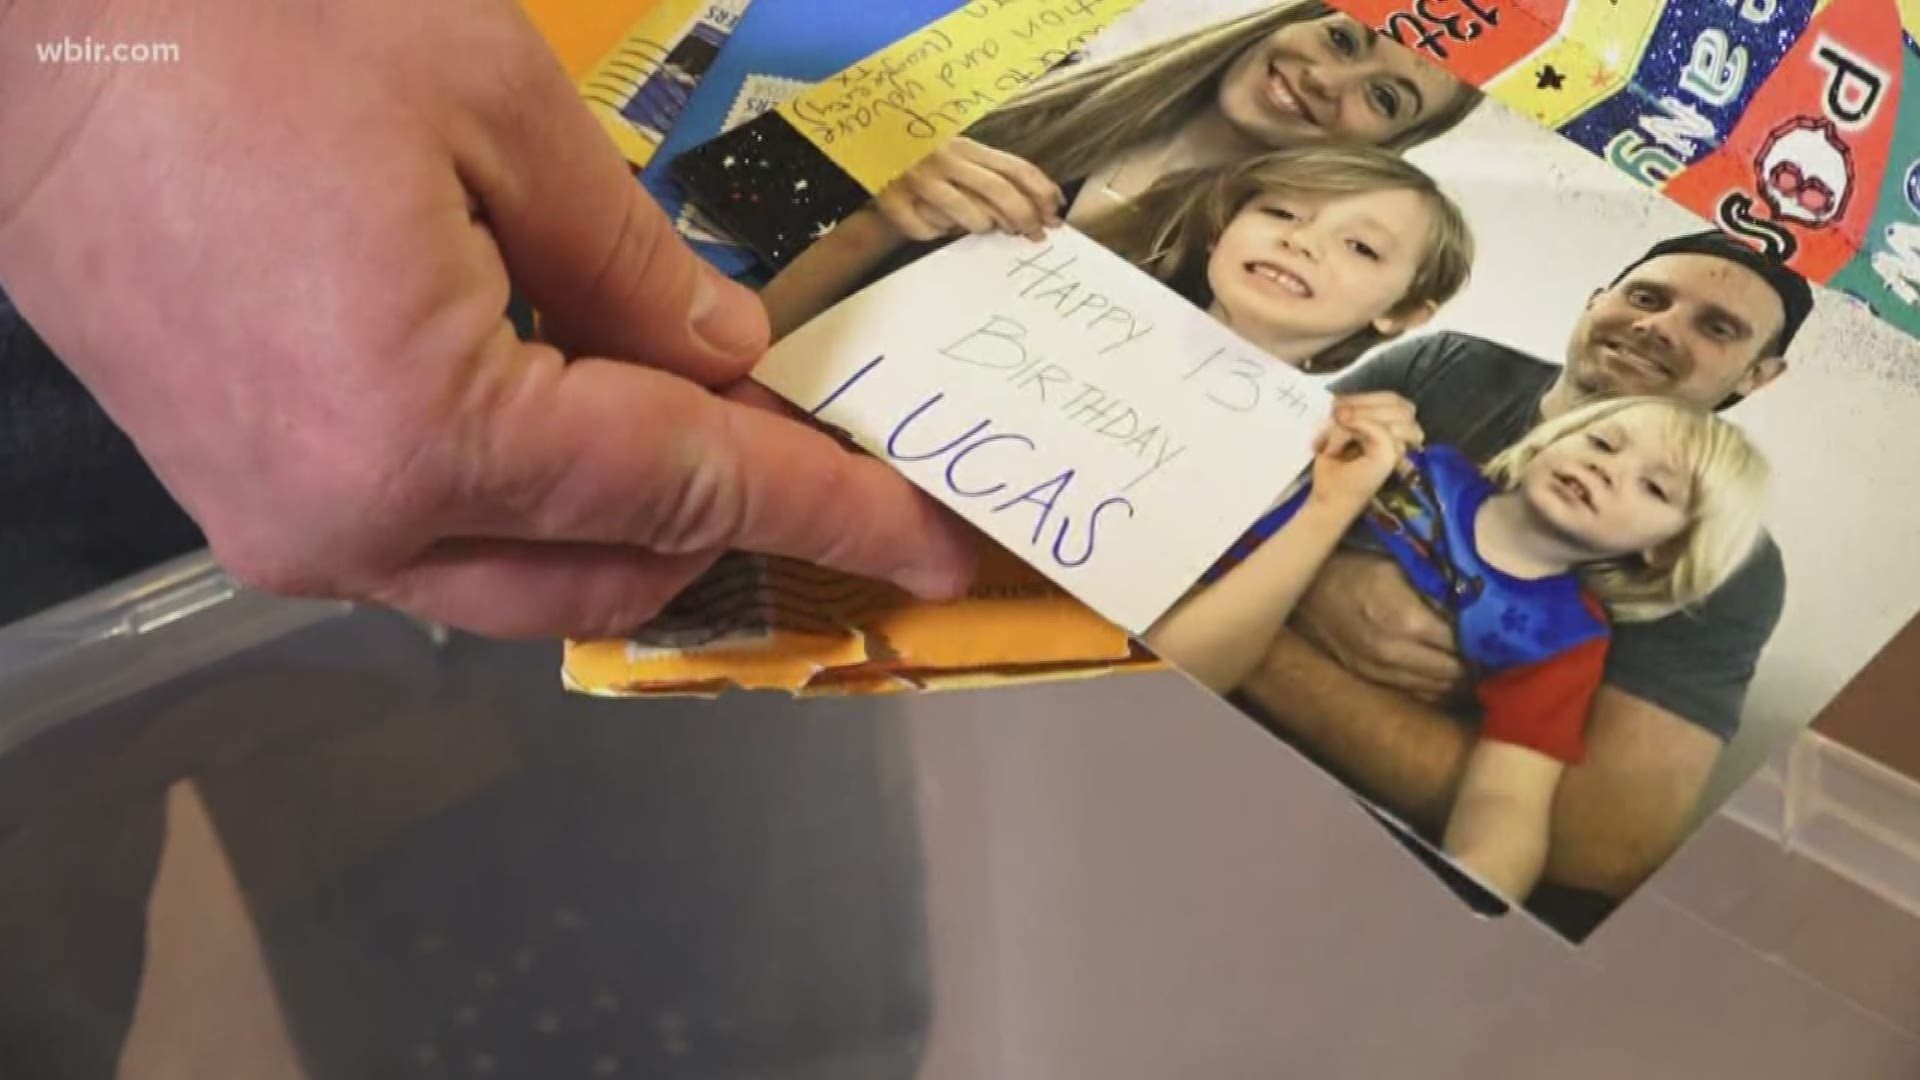 A terminally ill boy with a rare genetic disorder only wanted cards for his birthday. East Tennessee made that wish happen.